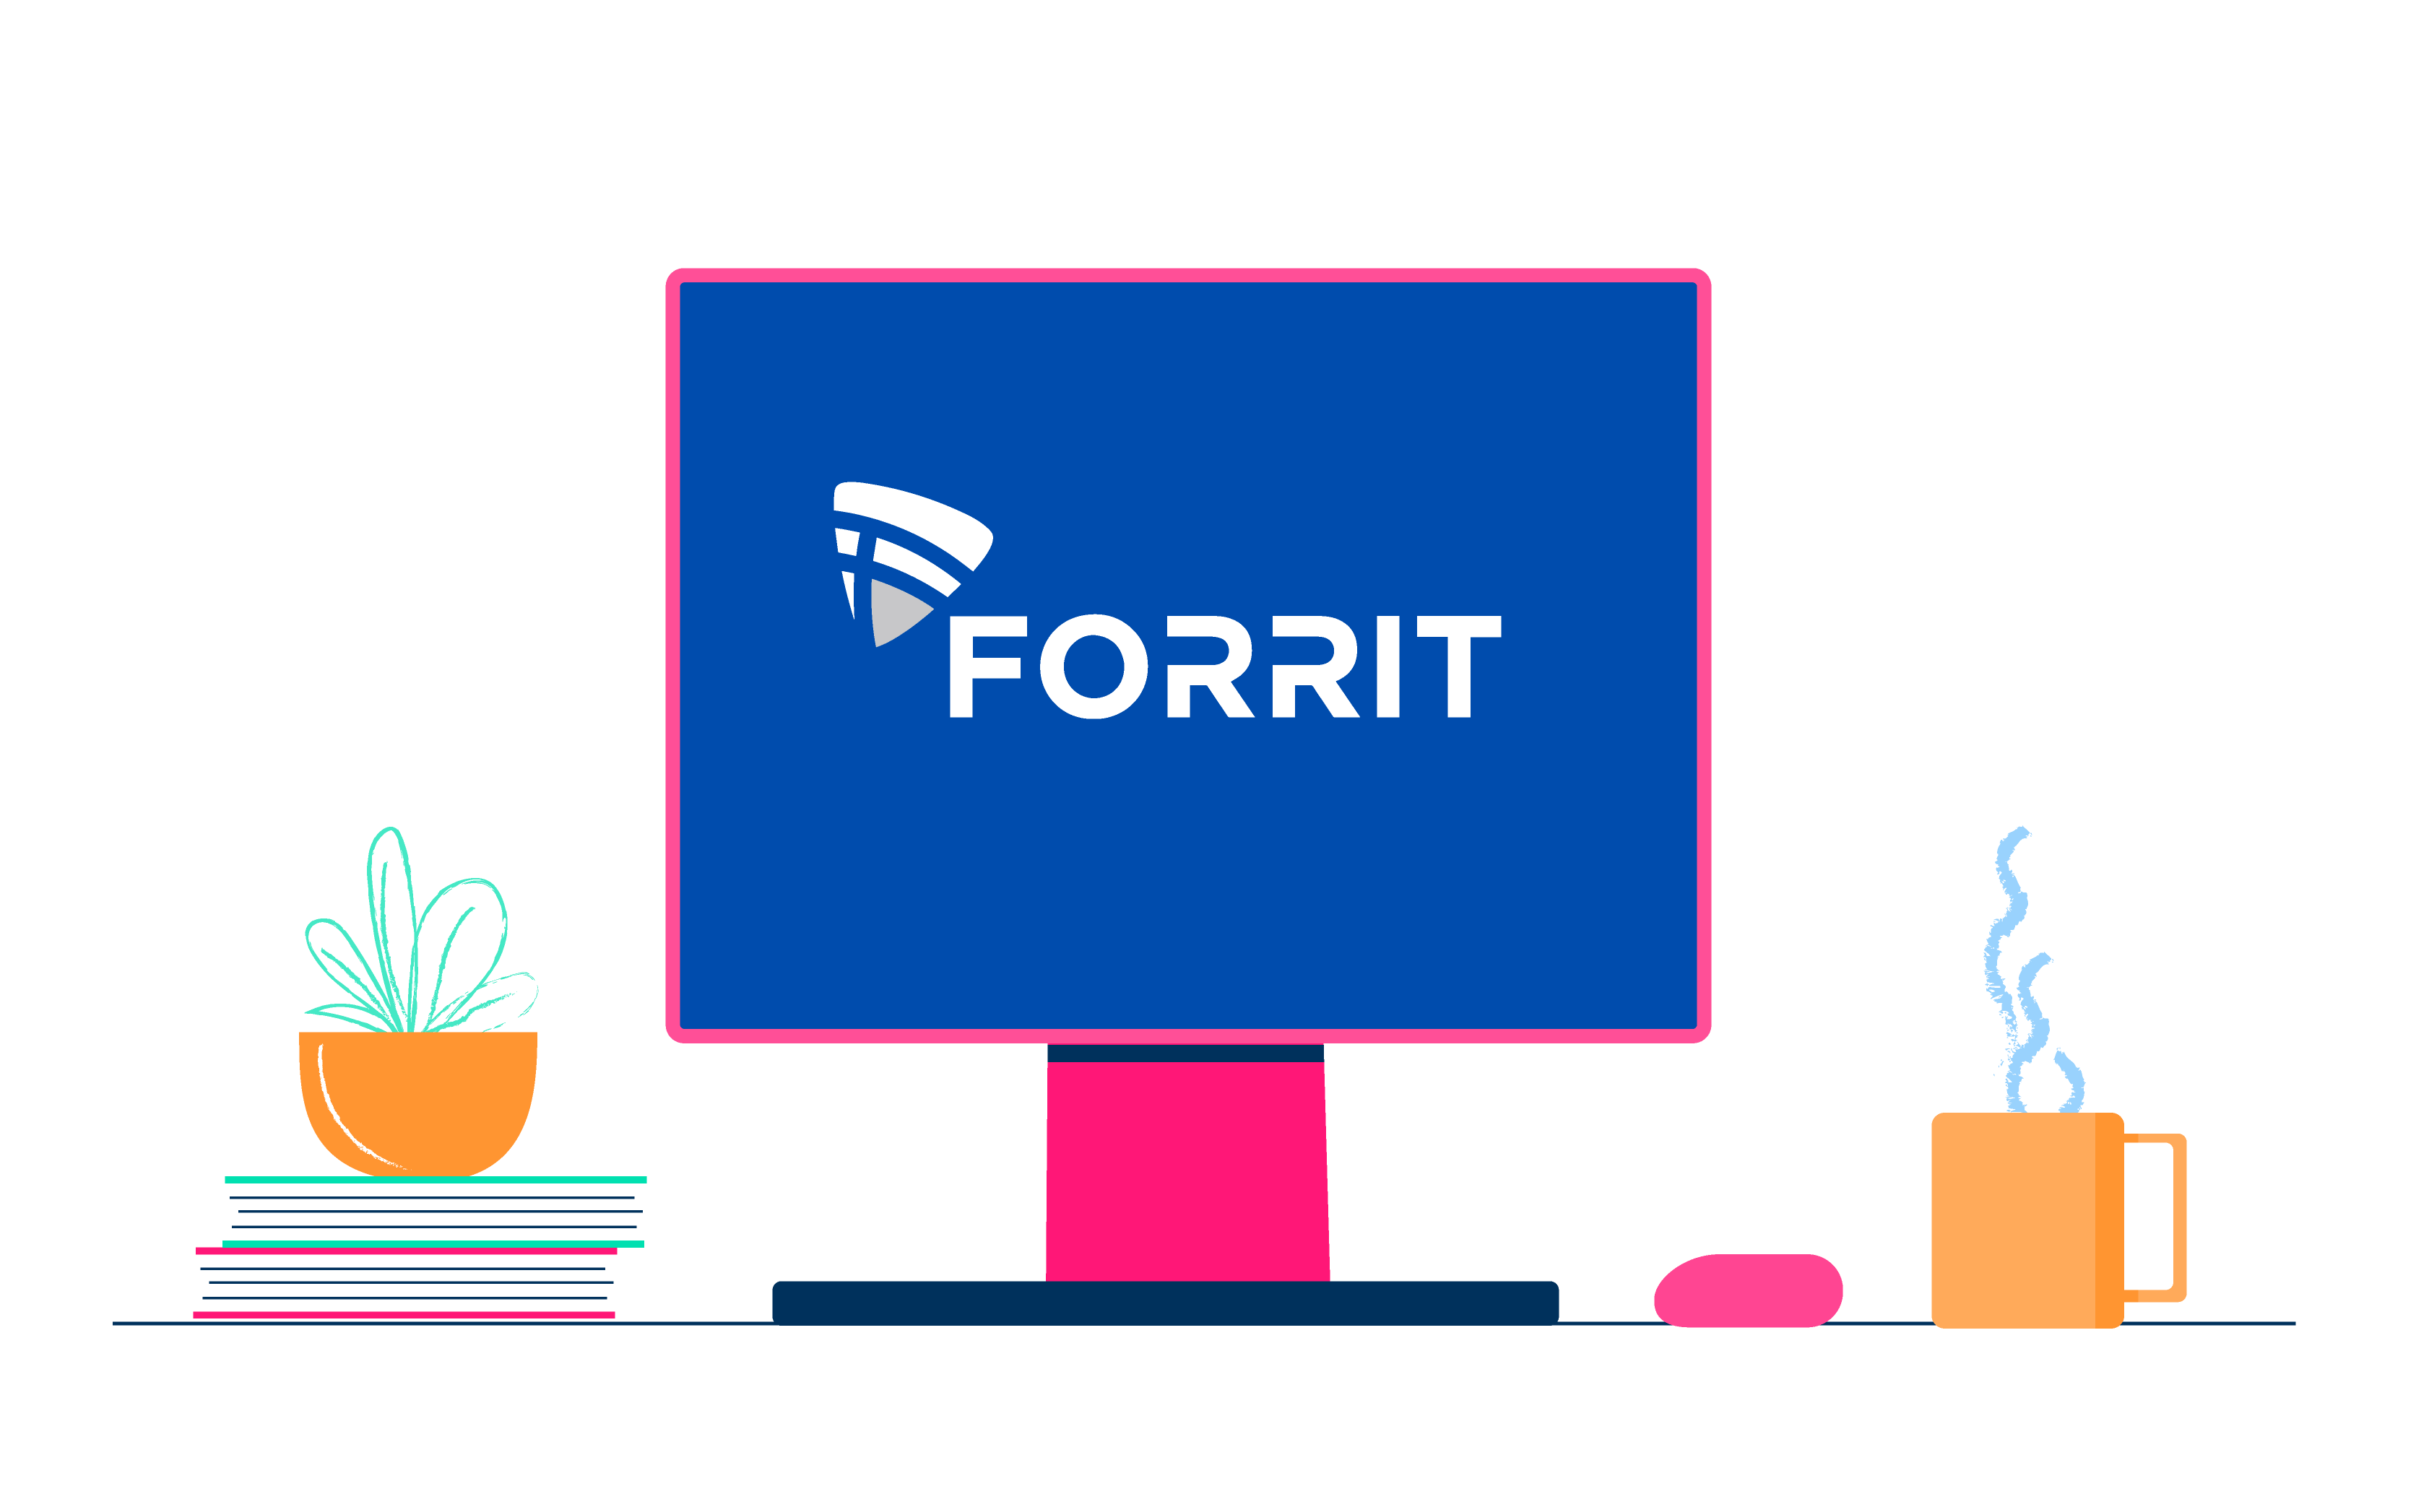 Illustration of the Forrit icon as a desktop background